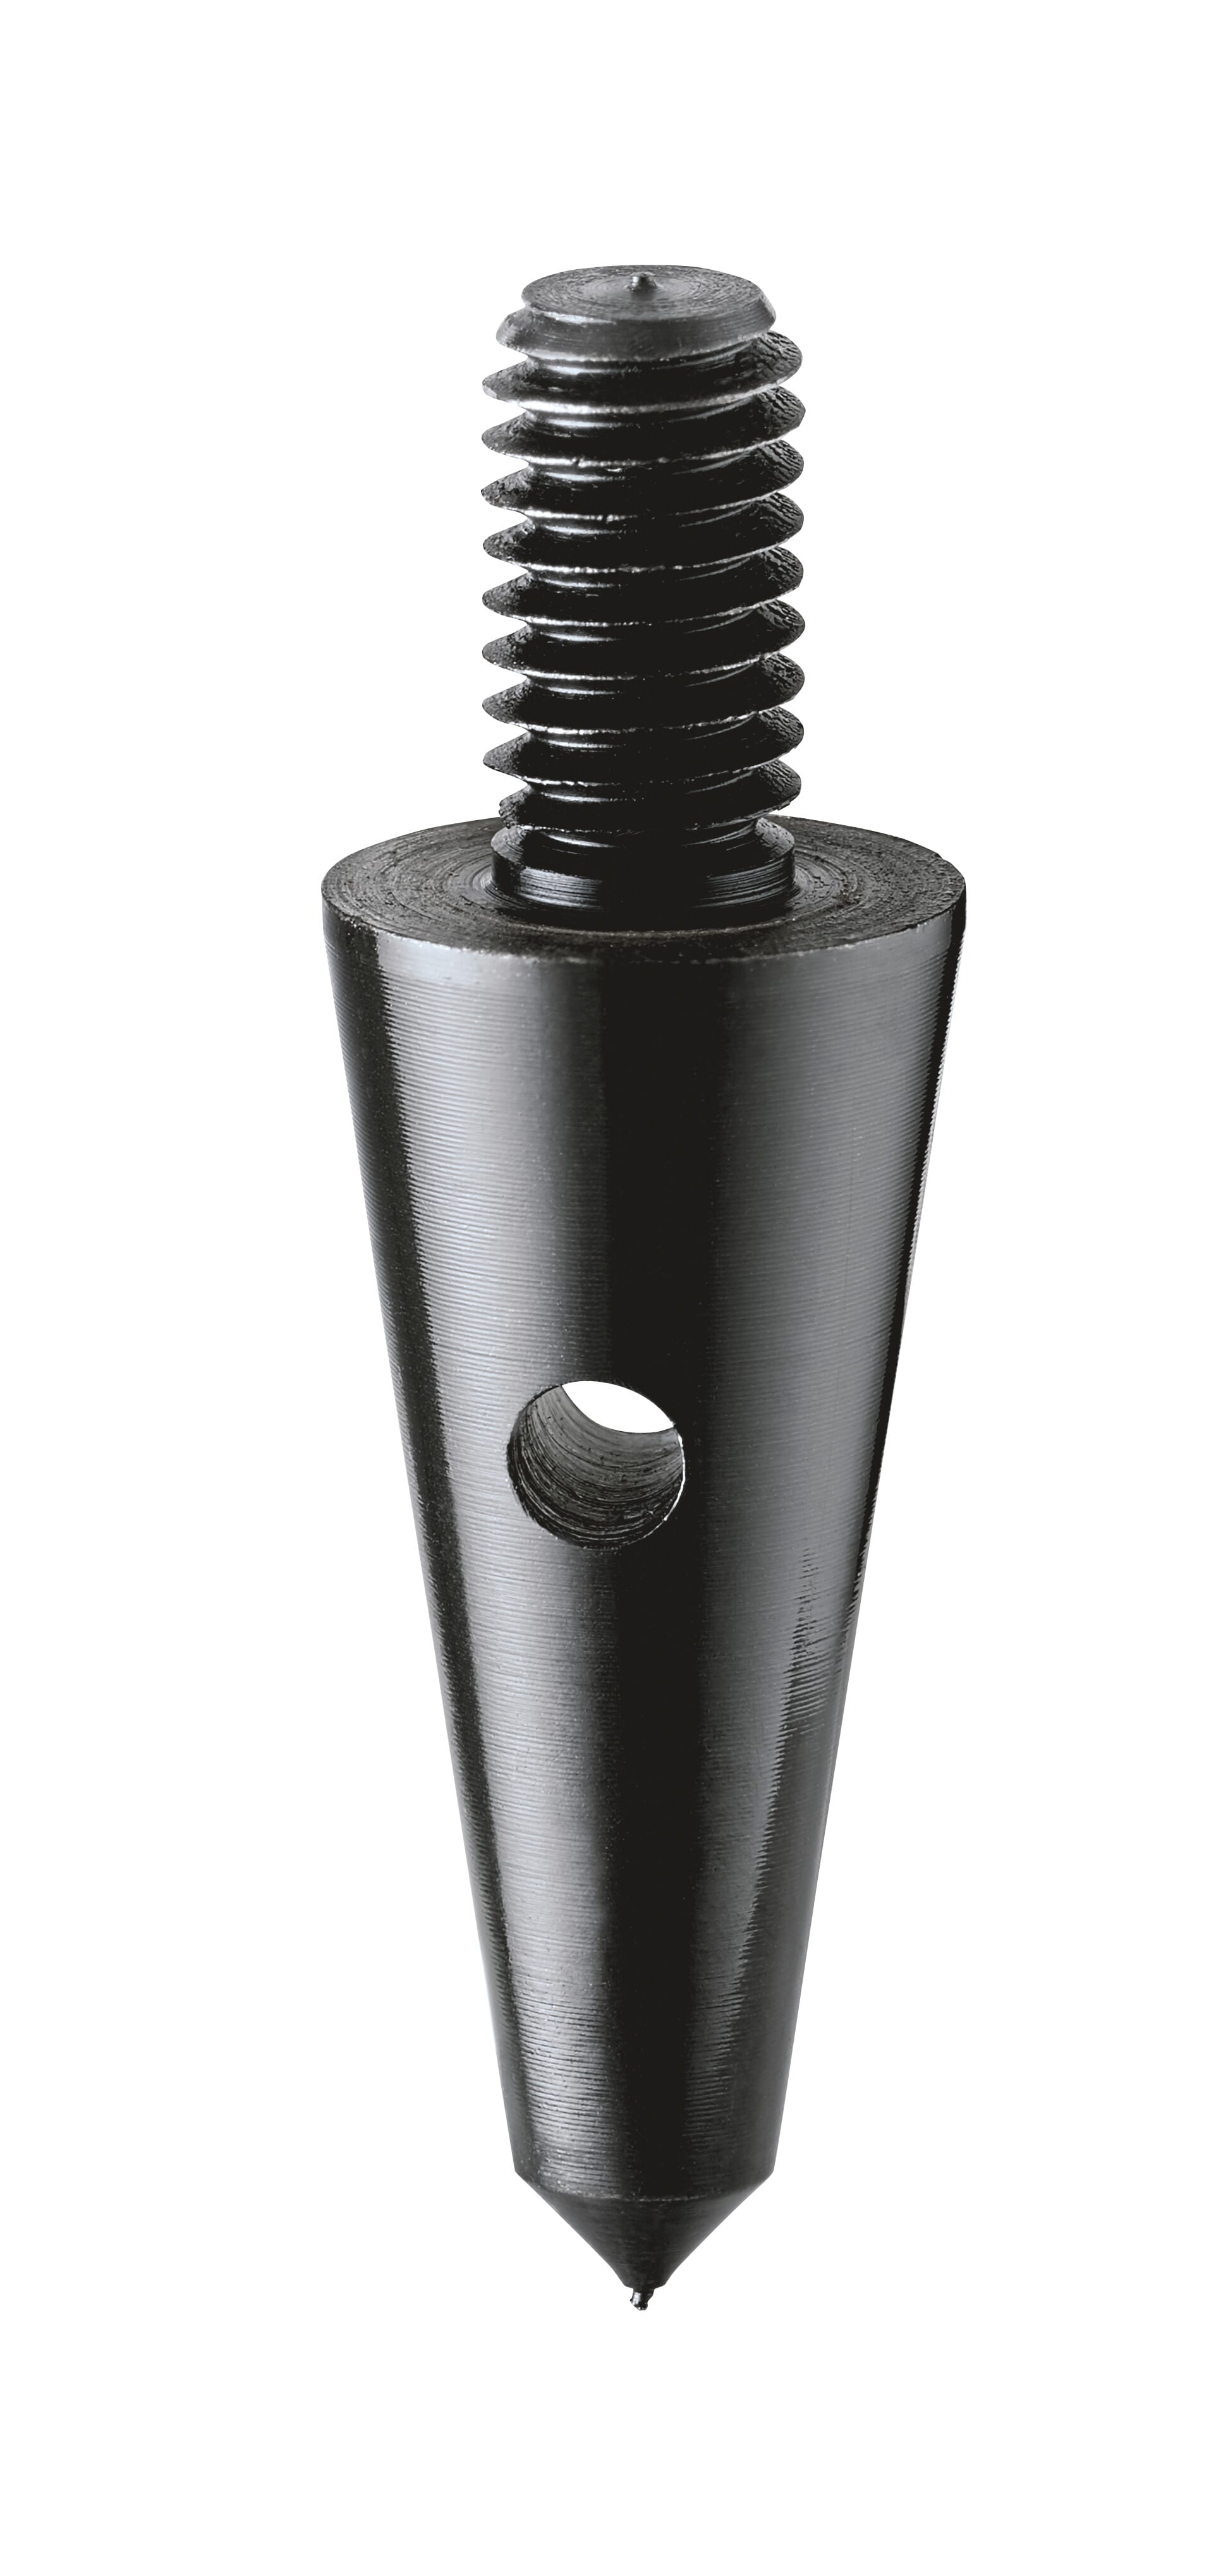 Milwaukee® Empire® 90832 Threaded Replacement Tip, Black Oxide, For Use With Any Size of Empire Level Brass Plumb Bobs, Steel